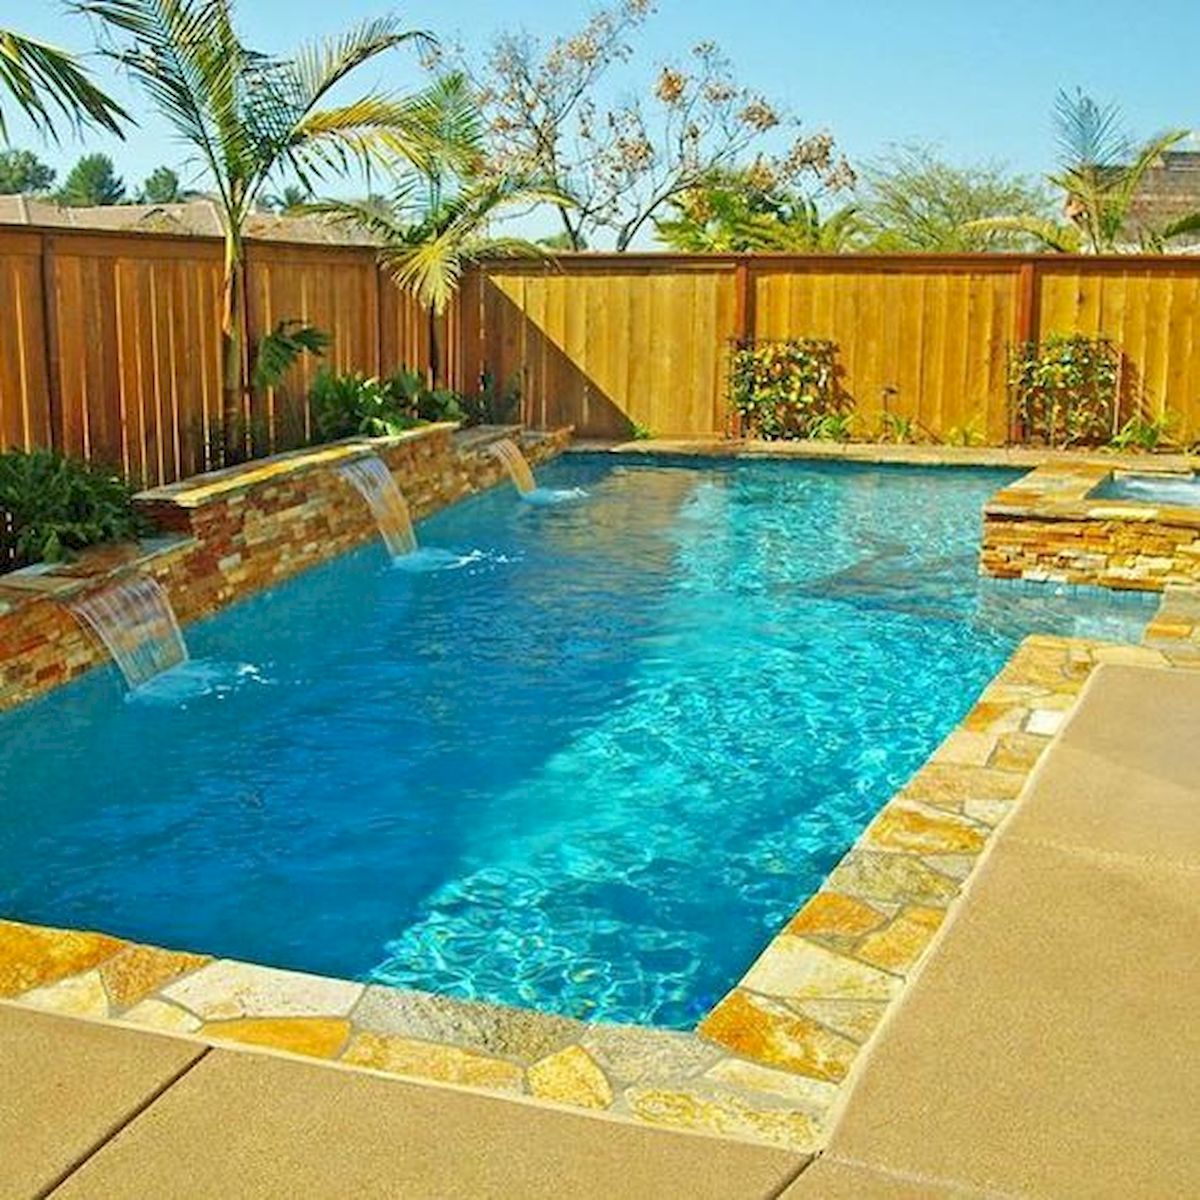 50 Gorgeous Small Swimming Pool Ideas for Small Backyard (36)